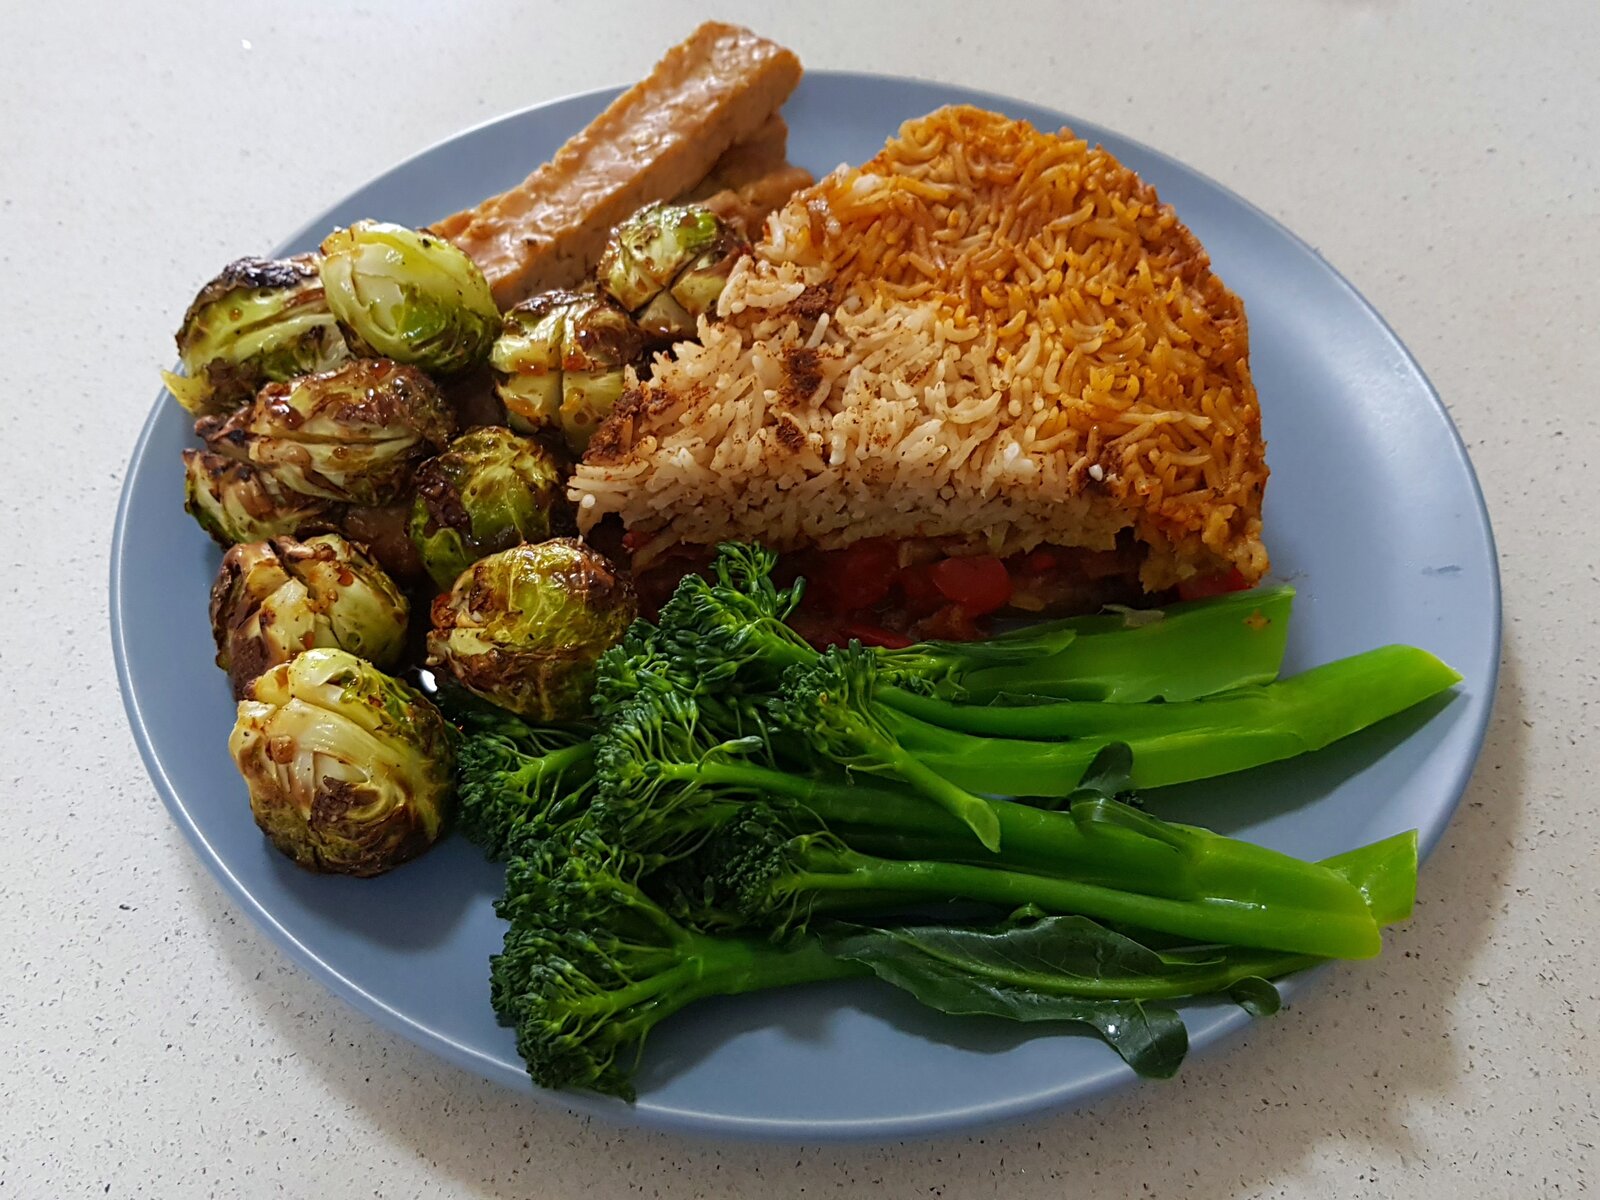 Palestinian Upside down Rice, homegrown broccoli, roasted sprouts and roasted tempeh